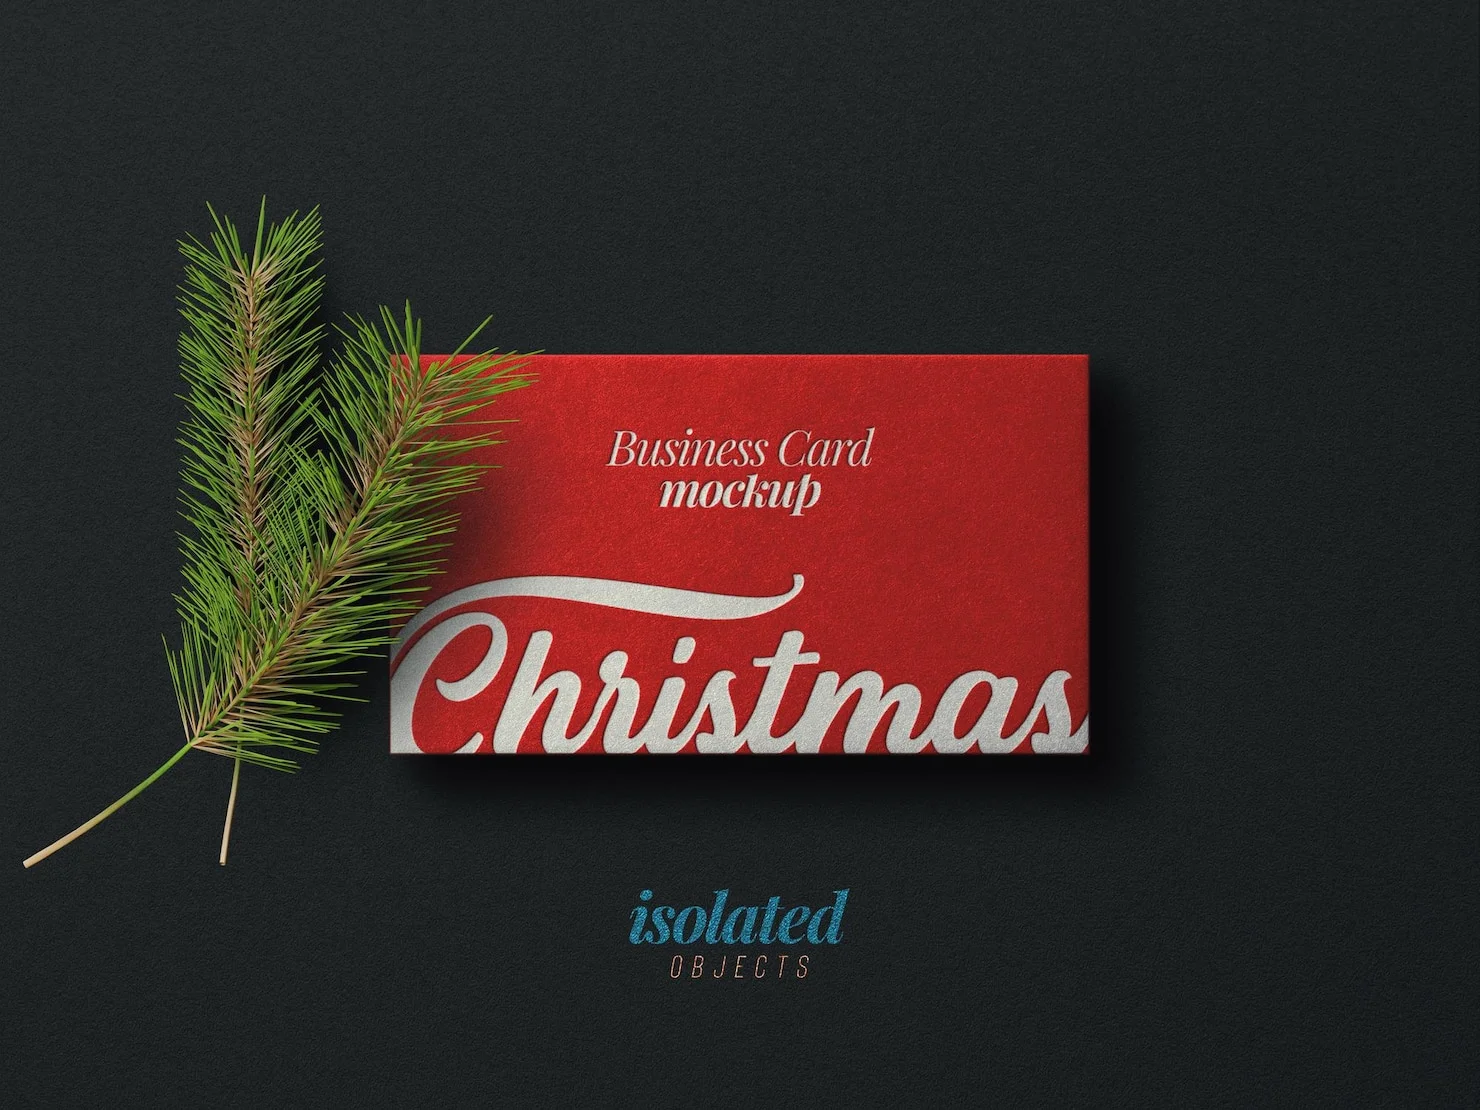 business card mockup with realistic embossed effects decorated with bunch pine leaves 103373 468